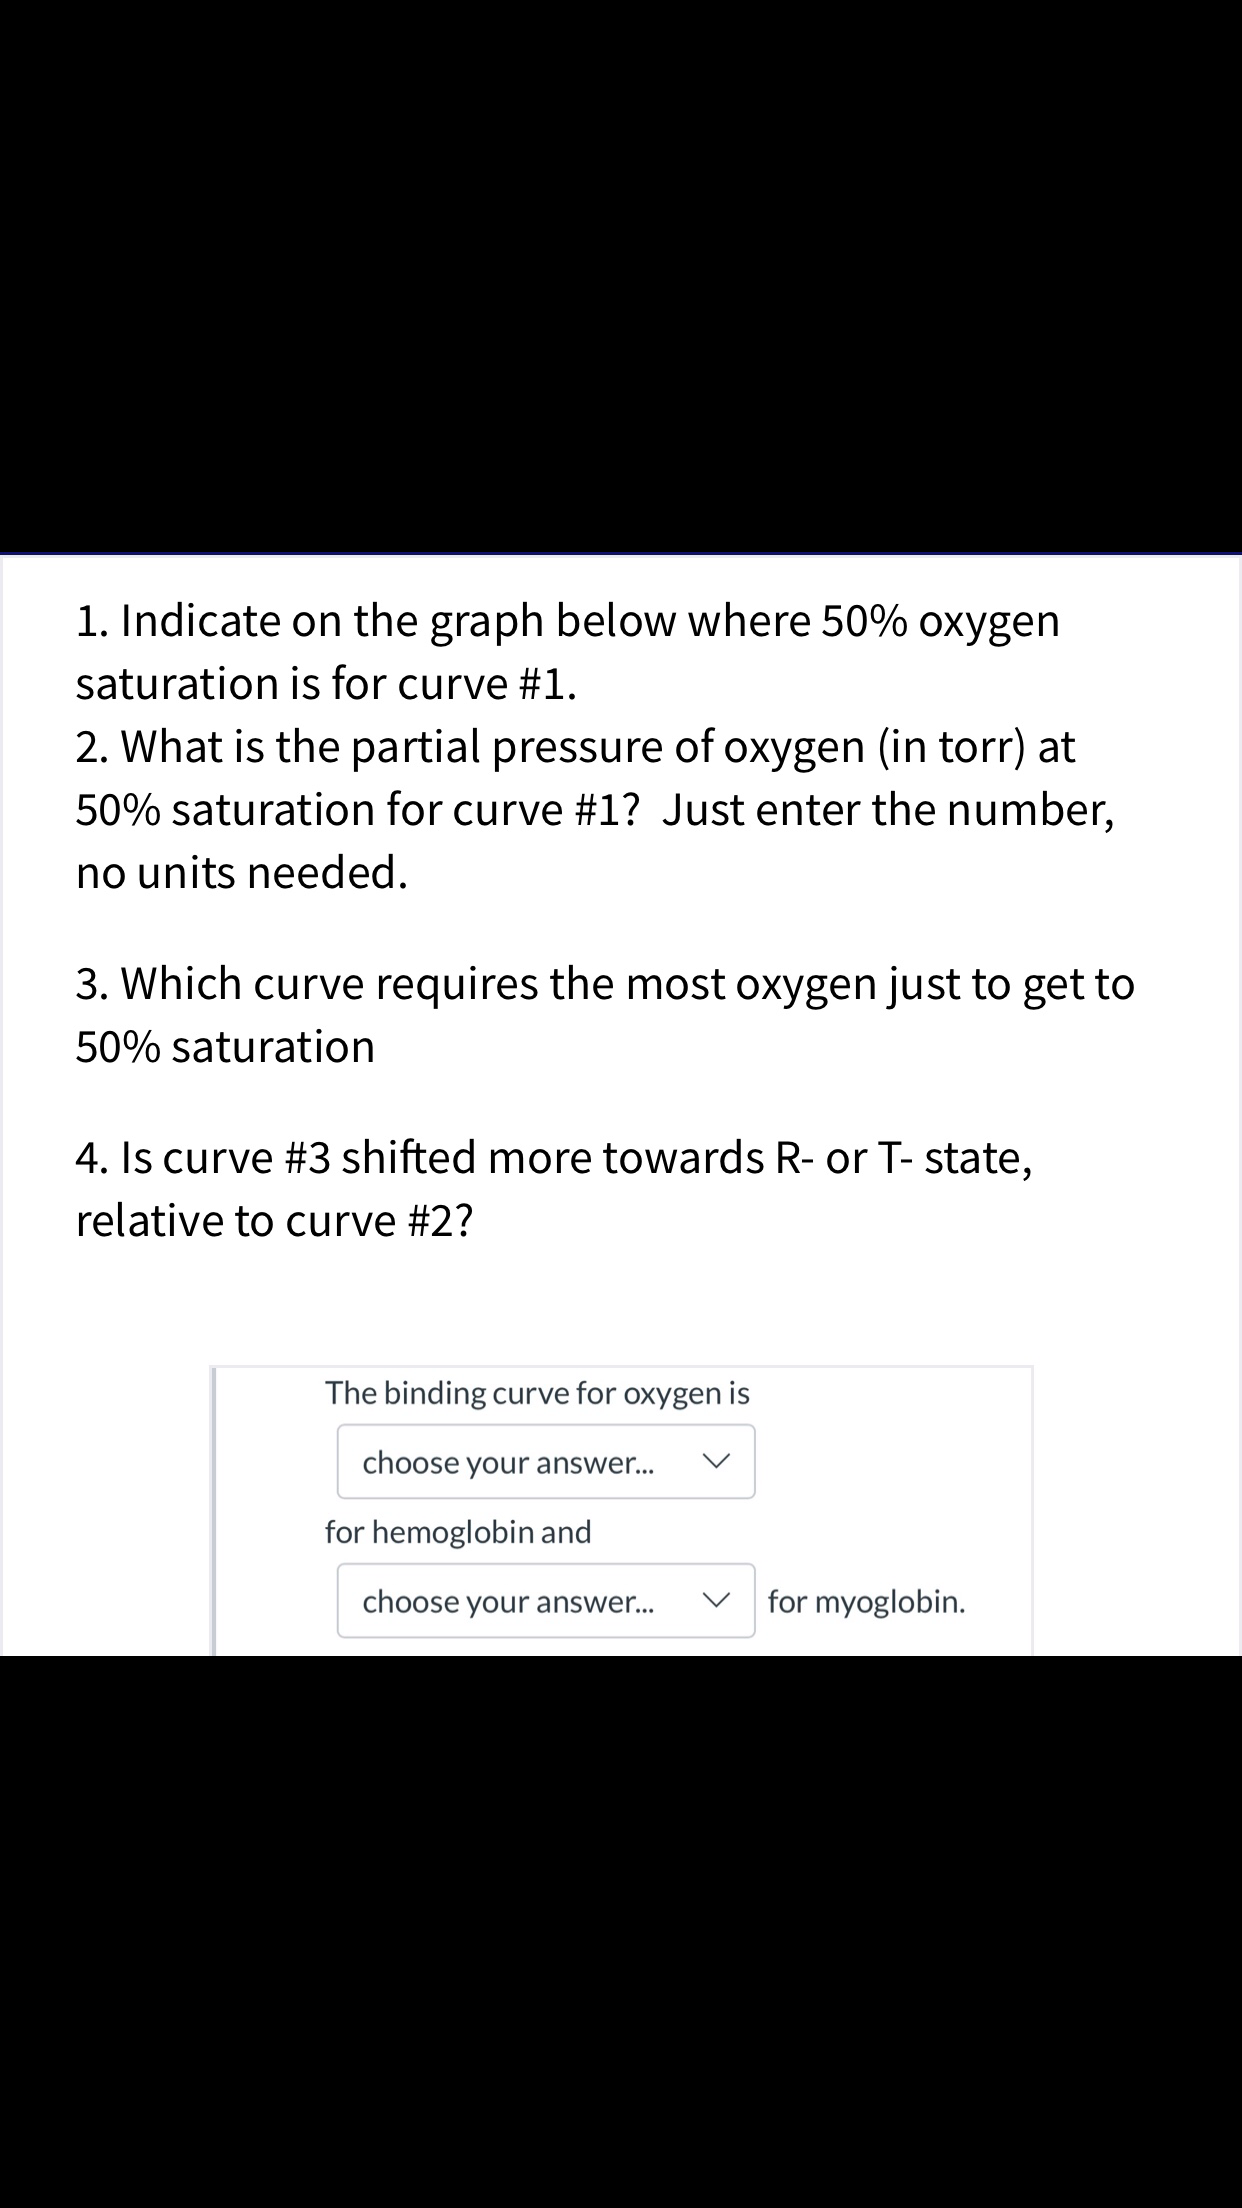 1. Indicate on the graph below where 50% oxygen
saturation is for curve #1.
2. What is the partial pressure of oxygen (in torr) at
50% saturation for curve #1? Just enter the number,
no units needed
3. Which curve requires the most oxygen just to get to
50% saturation
4. Is curve #3 shifted more towards R- or T- state,
relative to curve #2?
The binding curve for oxygen is
choose your answer...
for hemoglobin and
for myoglobin.
choose your answer...
